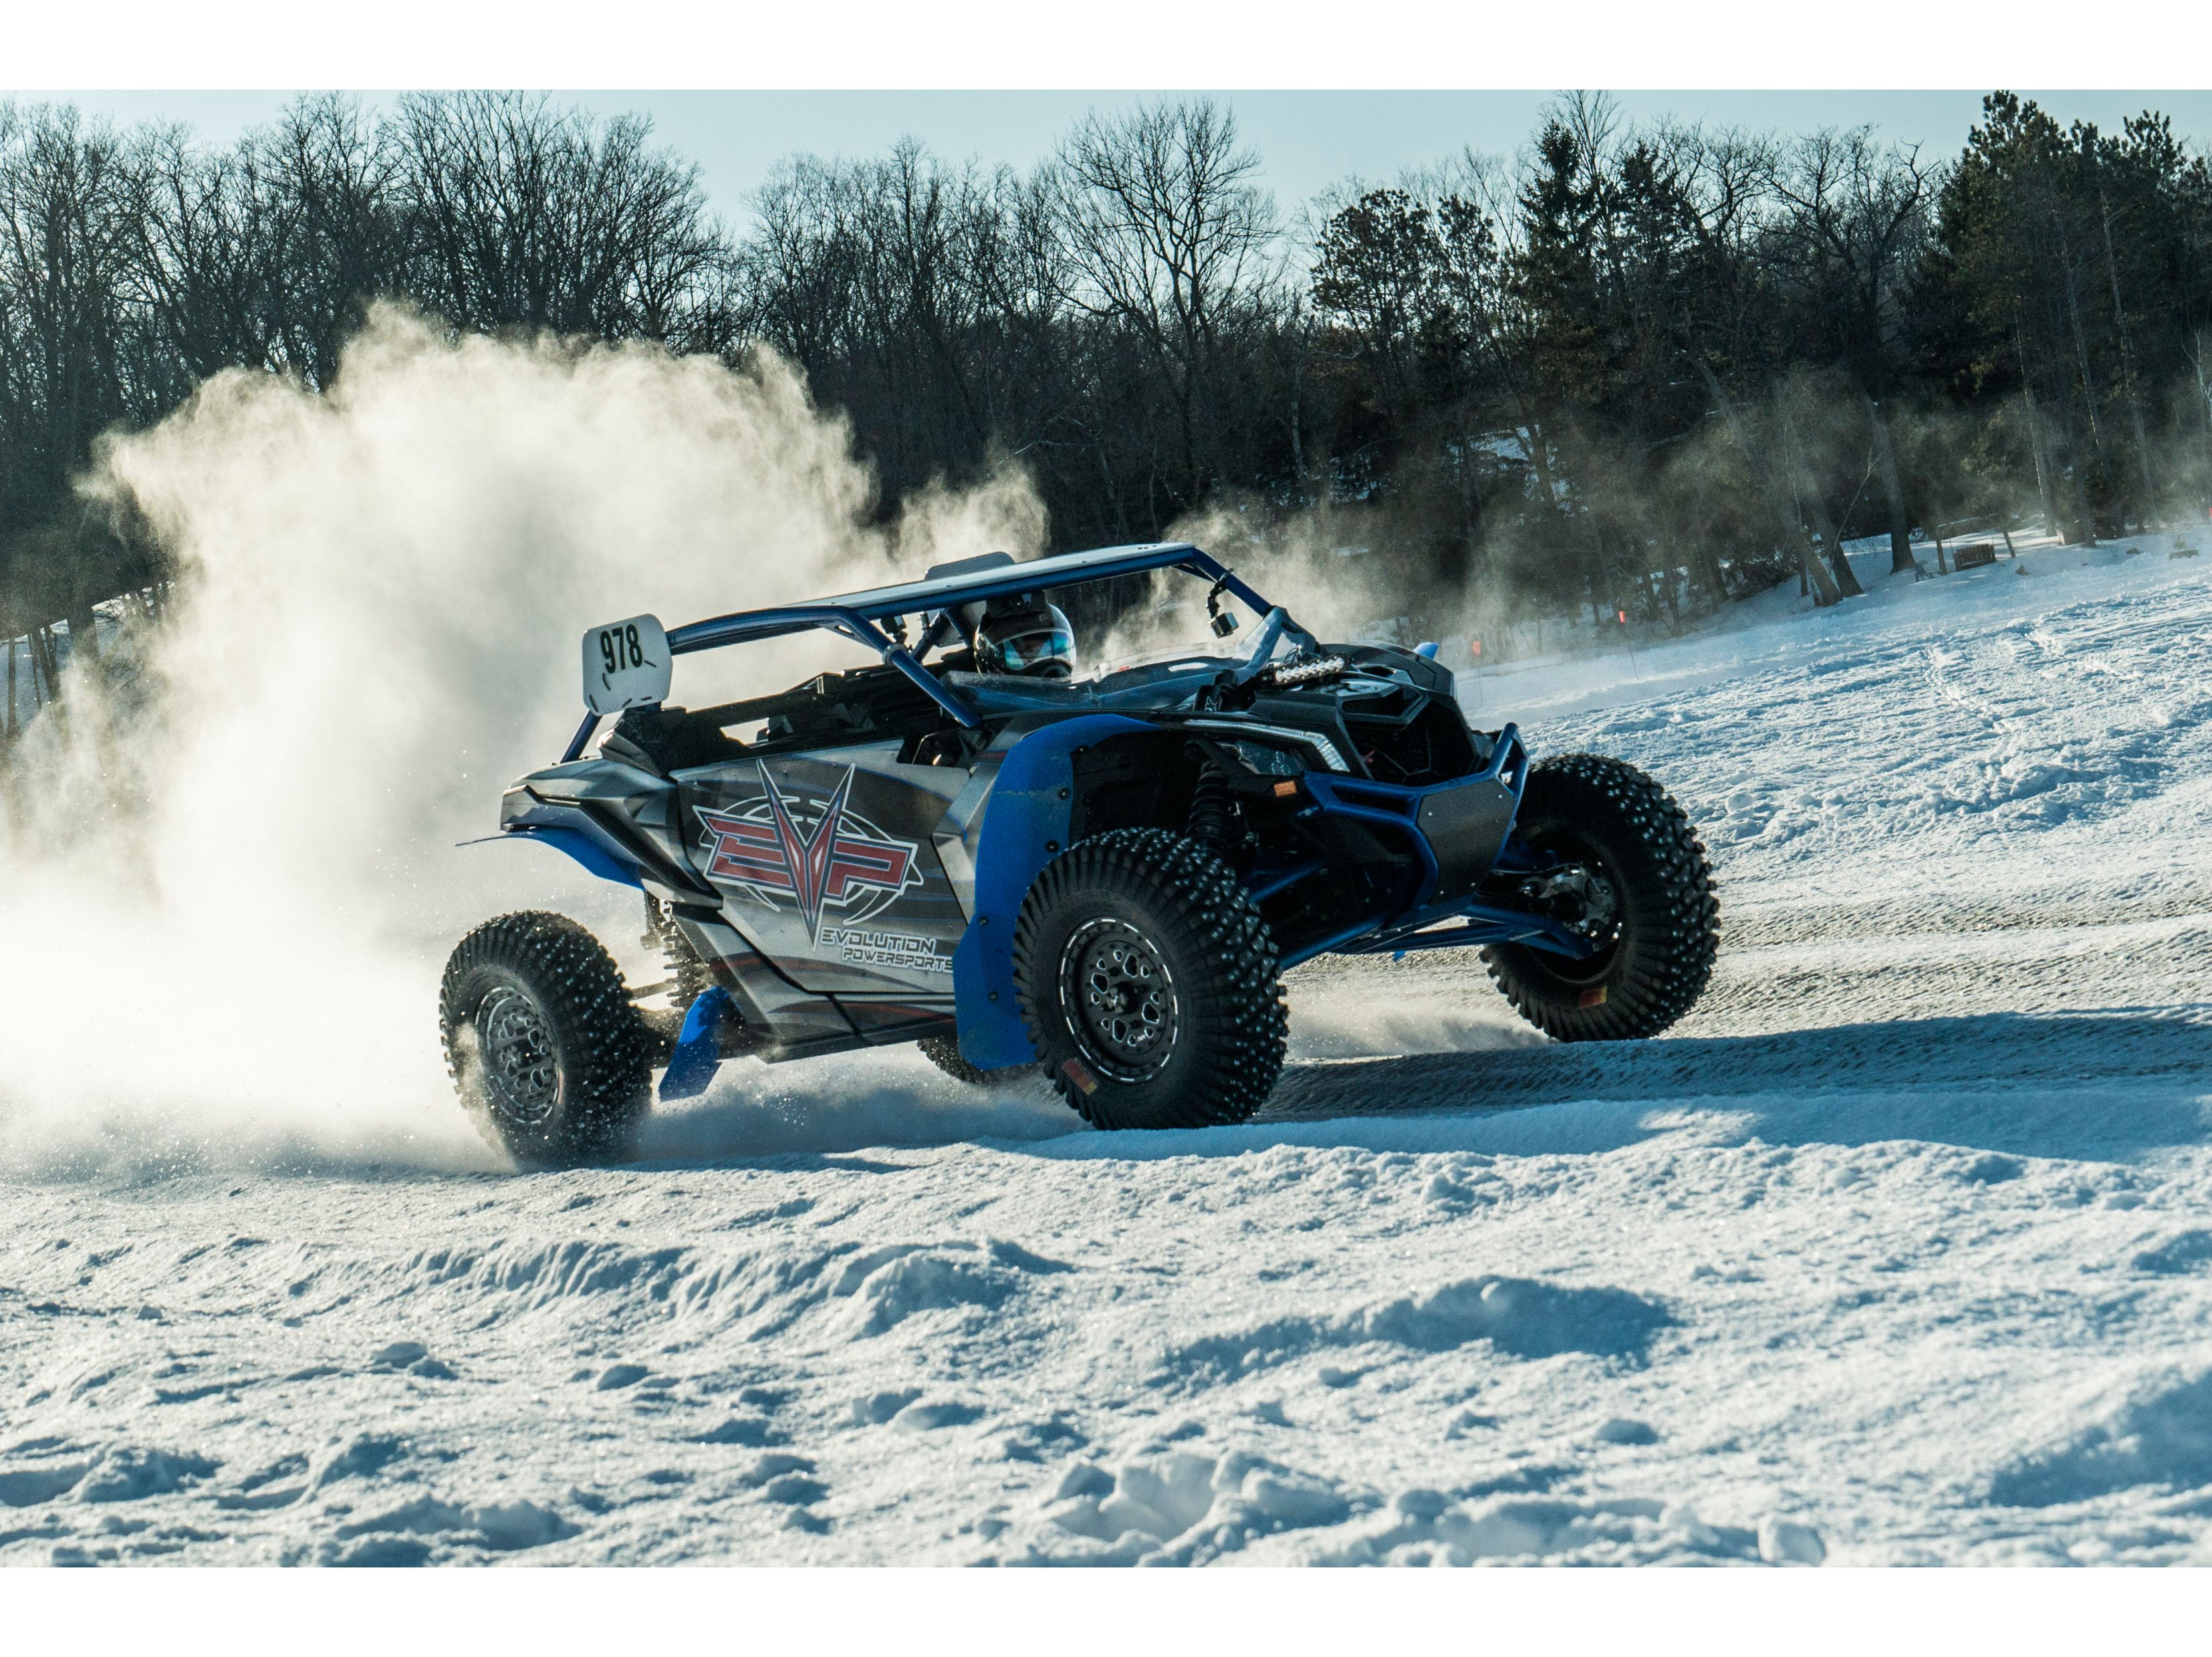 Dustin Jones riding on the snow with his Can-Am SxS